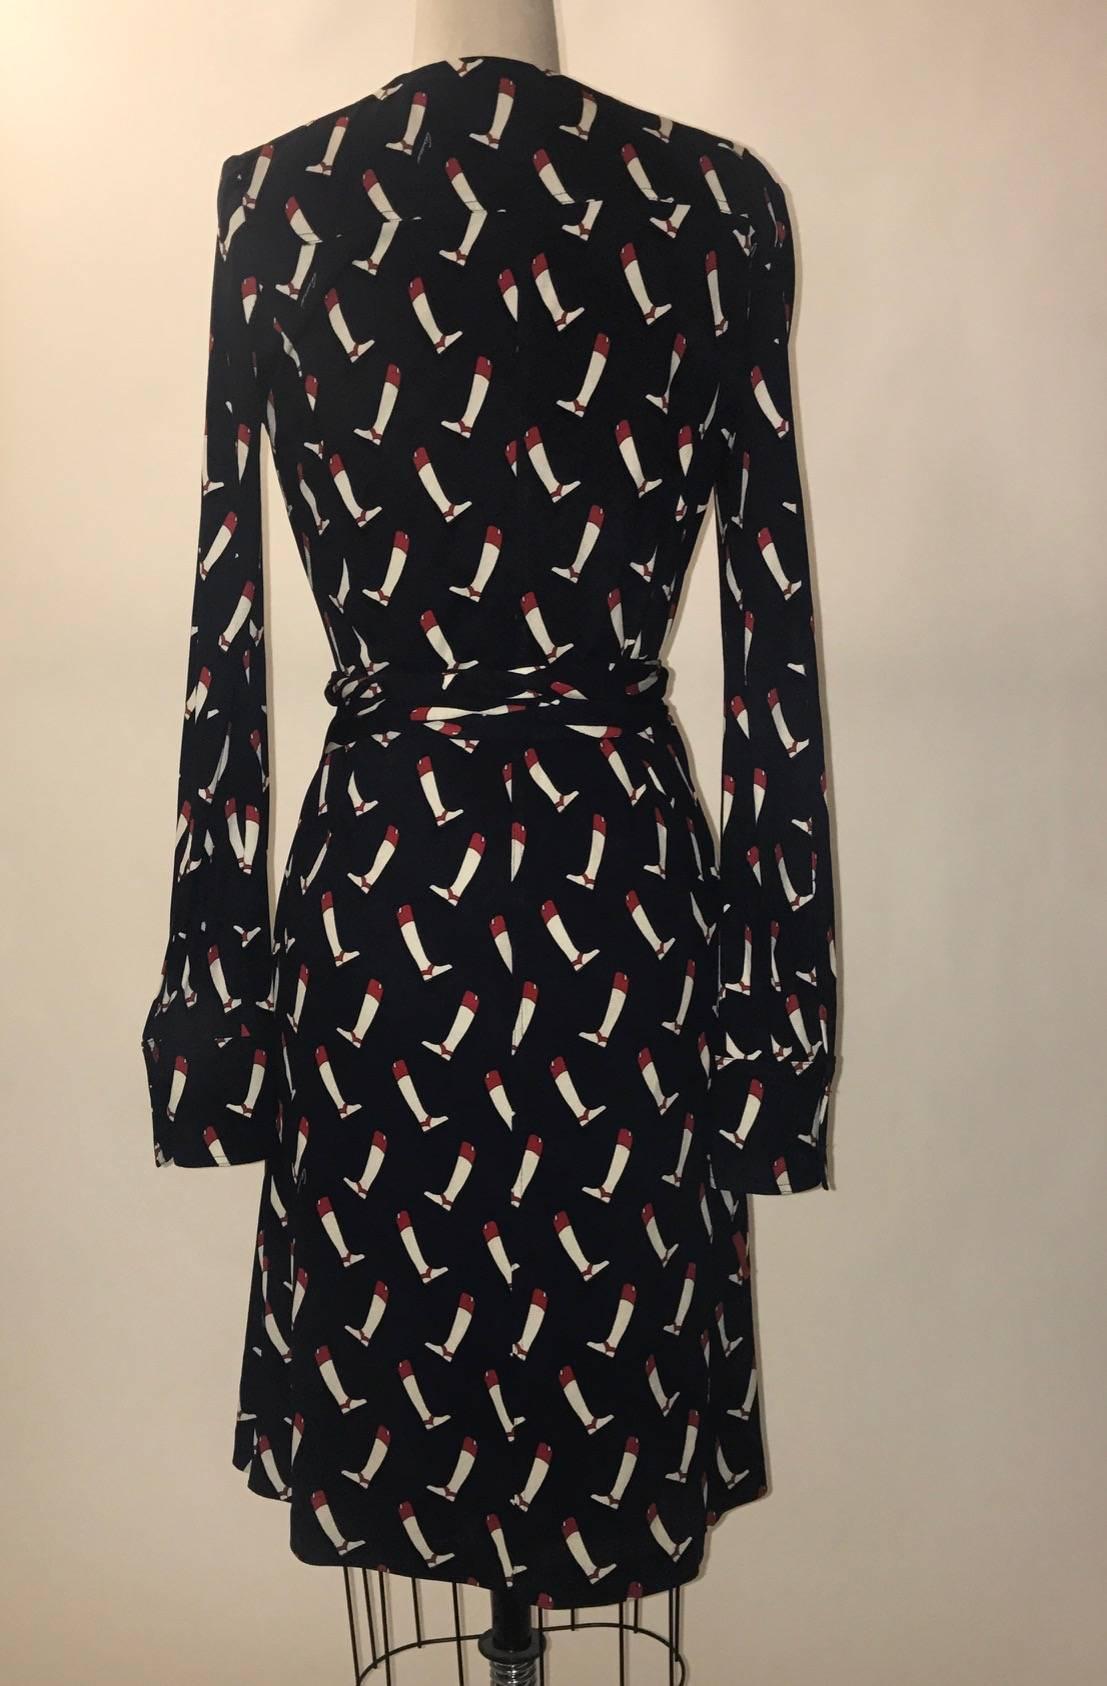 Gucci navy silk wrap dress from the 2005 collection featuring white and red equestrian boot print and white 'gucci' signature throughout. Blouse-cut sleeves with cuffs. Silver horsebit charms dangle from the ends of attached wrap belt. Closes with a